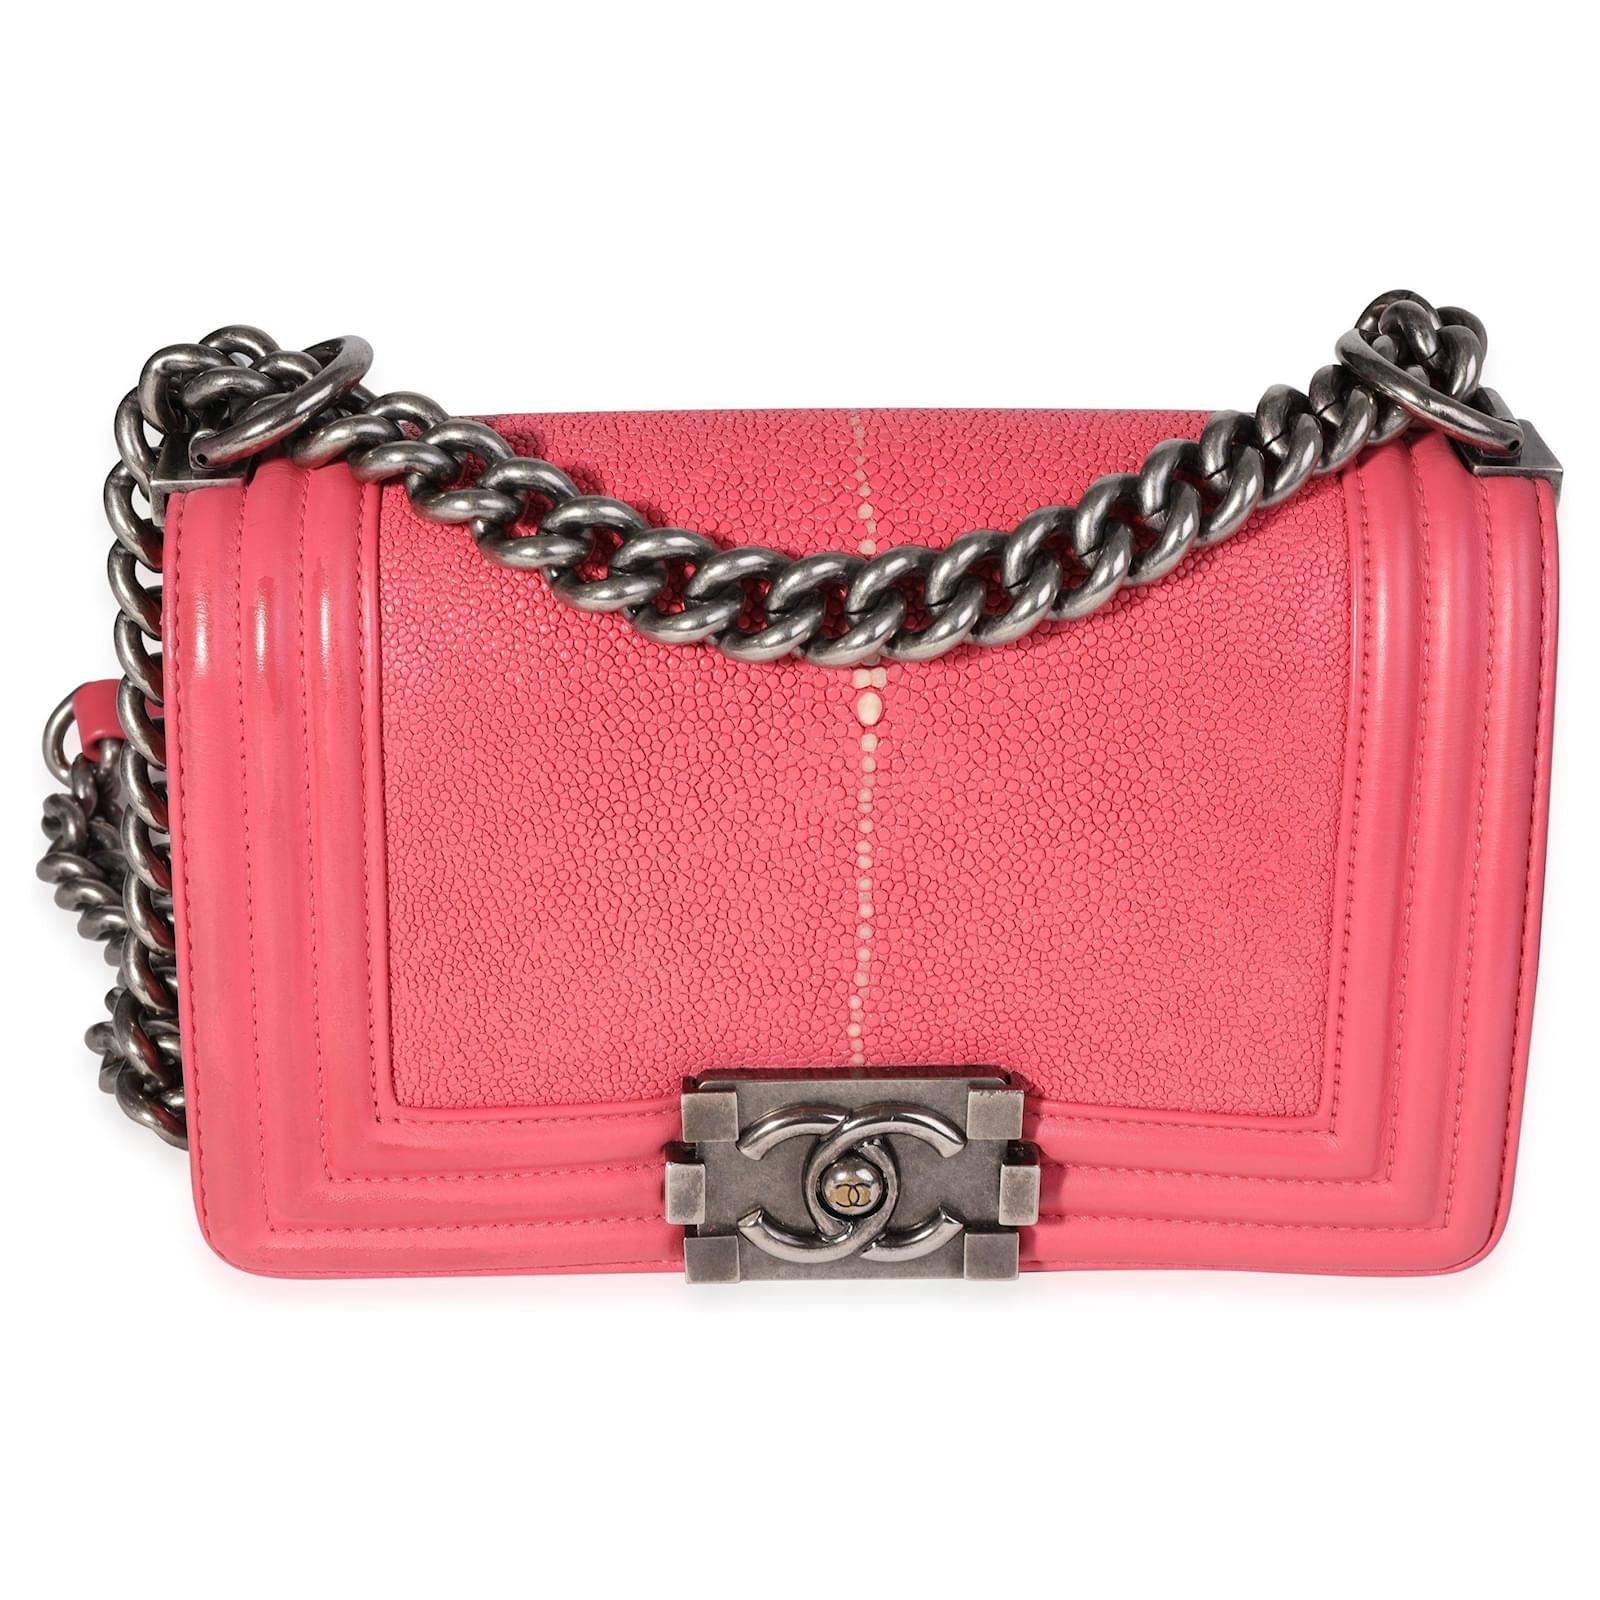 Chanel Pink Stingray & calf leather Small Boy Bag Pony-style